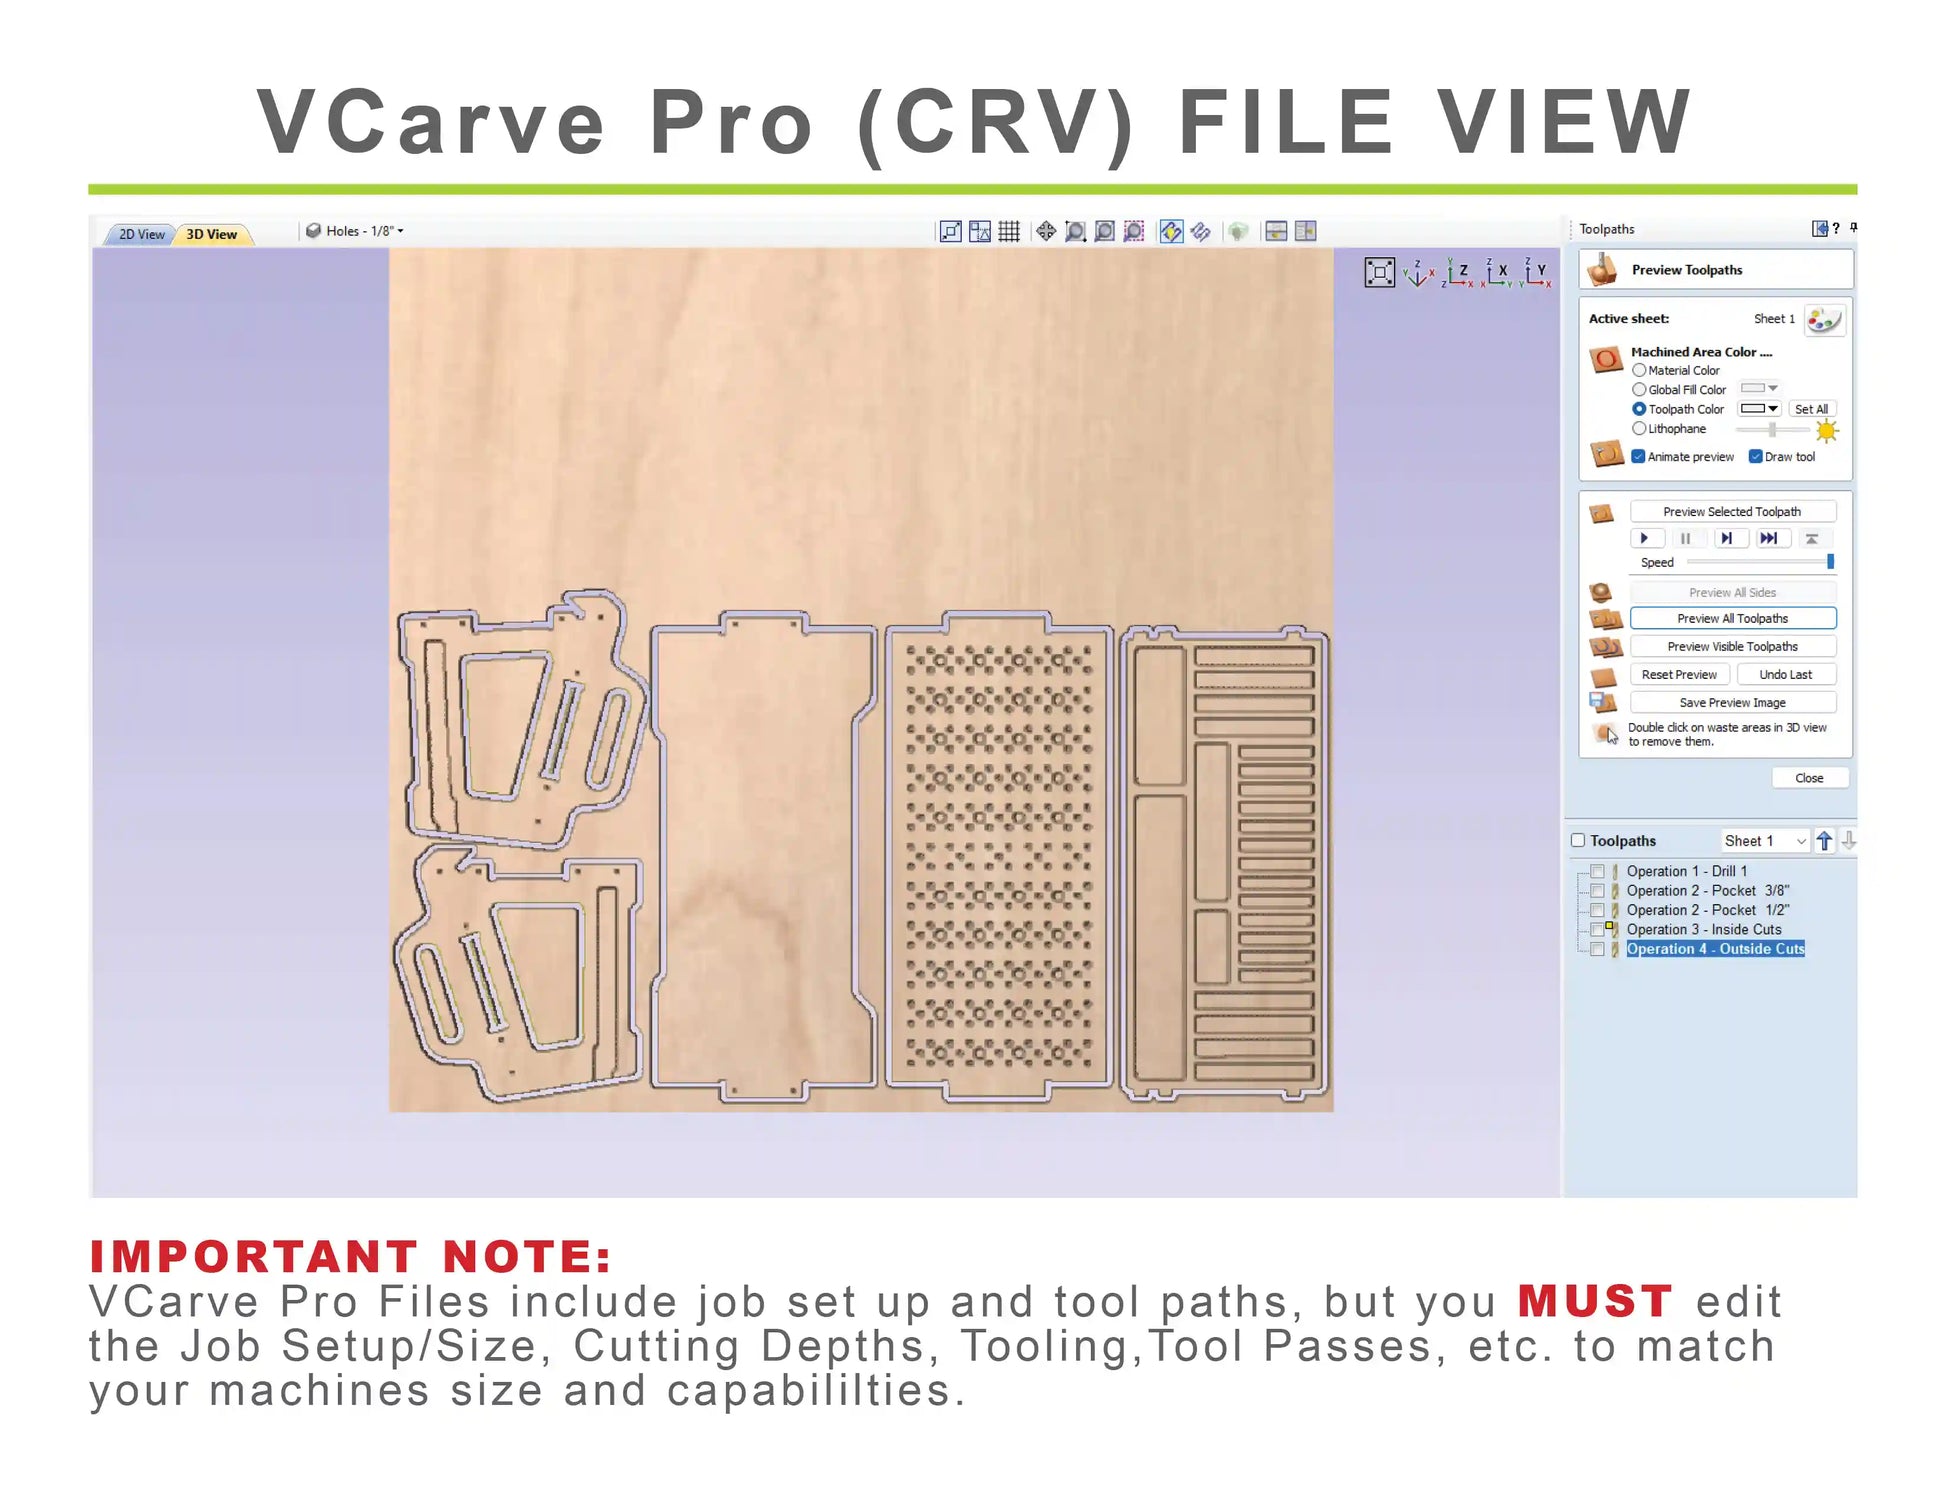 vectric vcarve pro files for sale french cleat router bit storage rack organizer made from plywood with toolpaths for cnc wood cutting